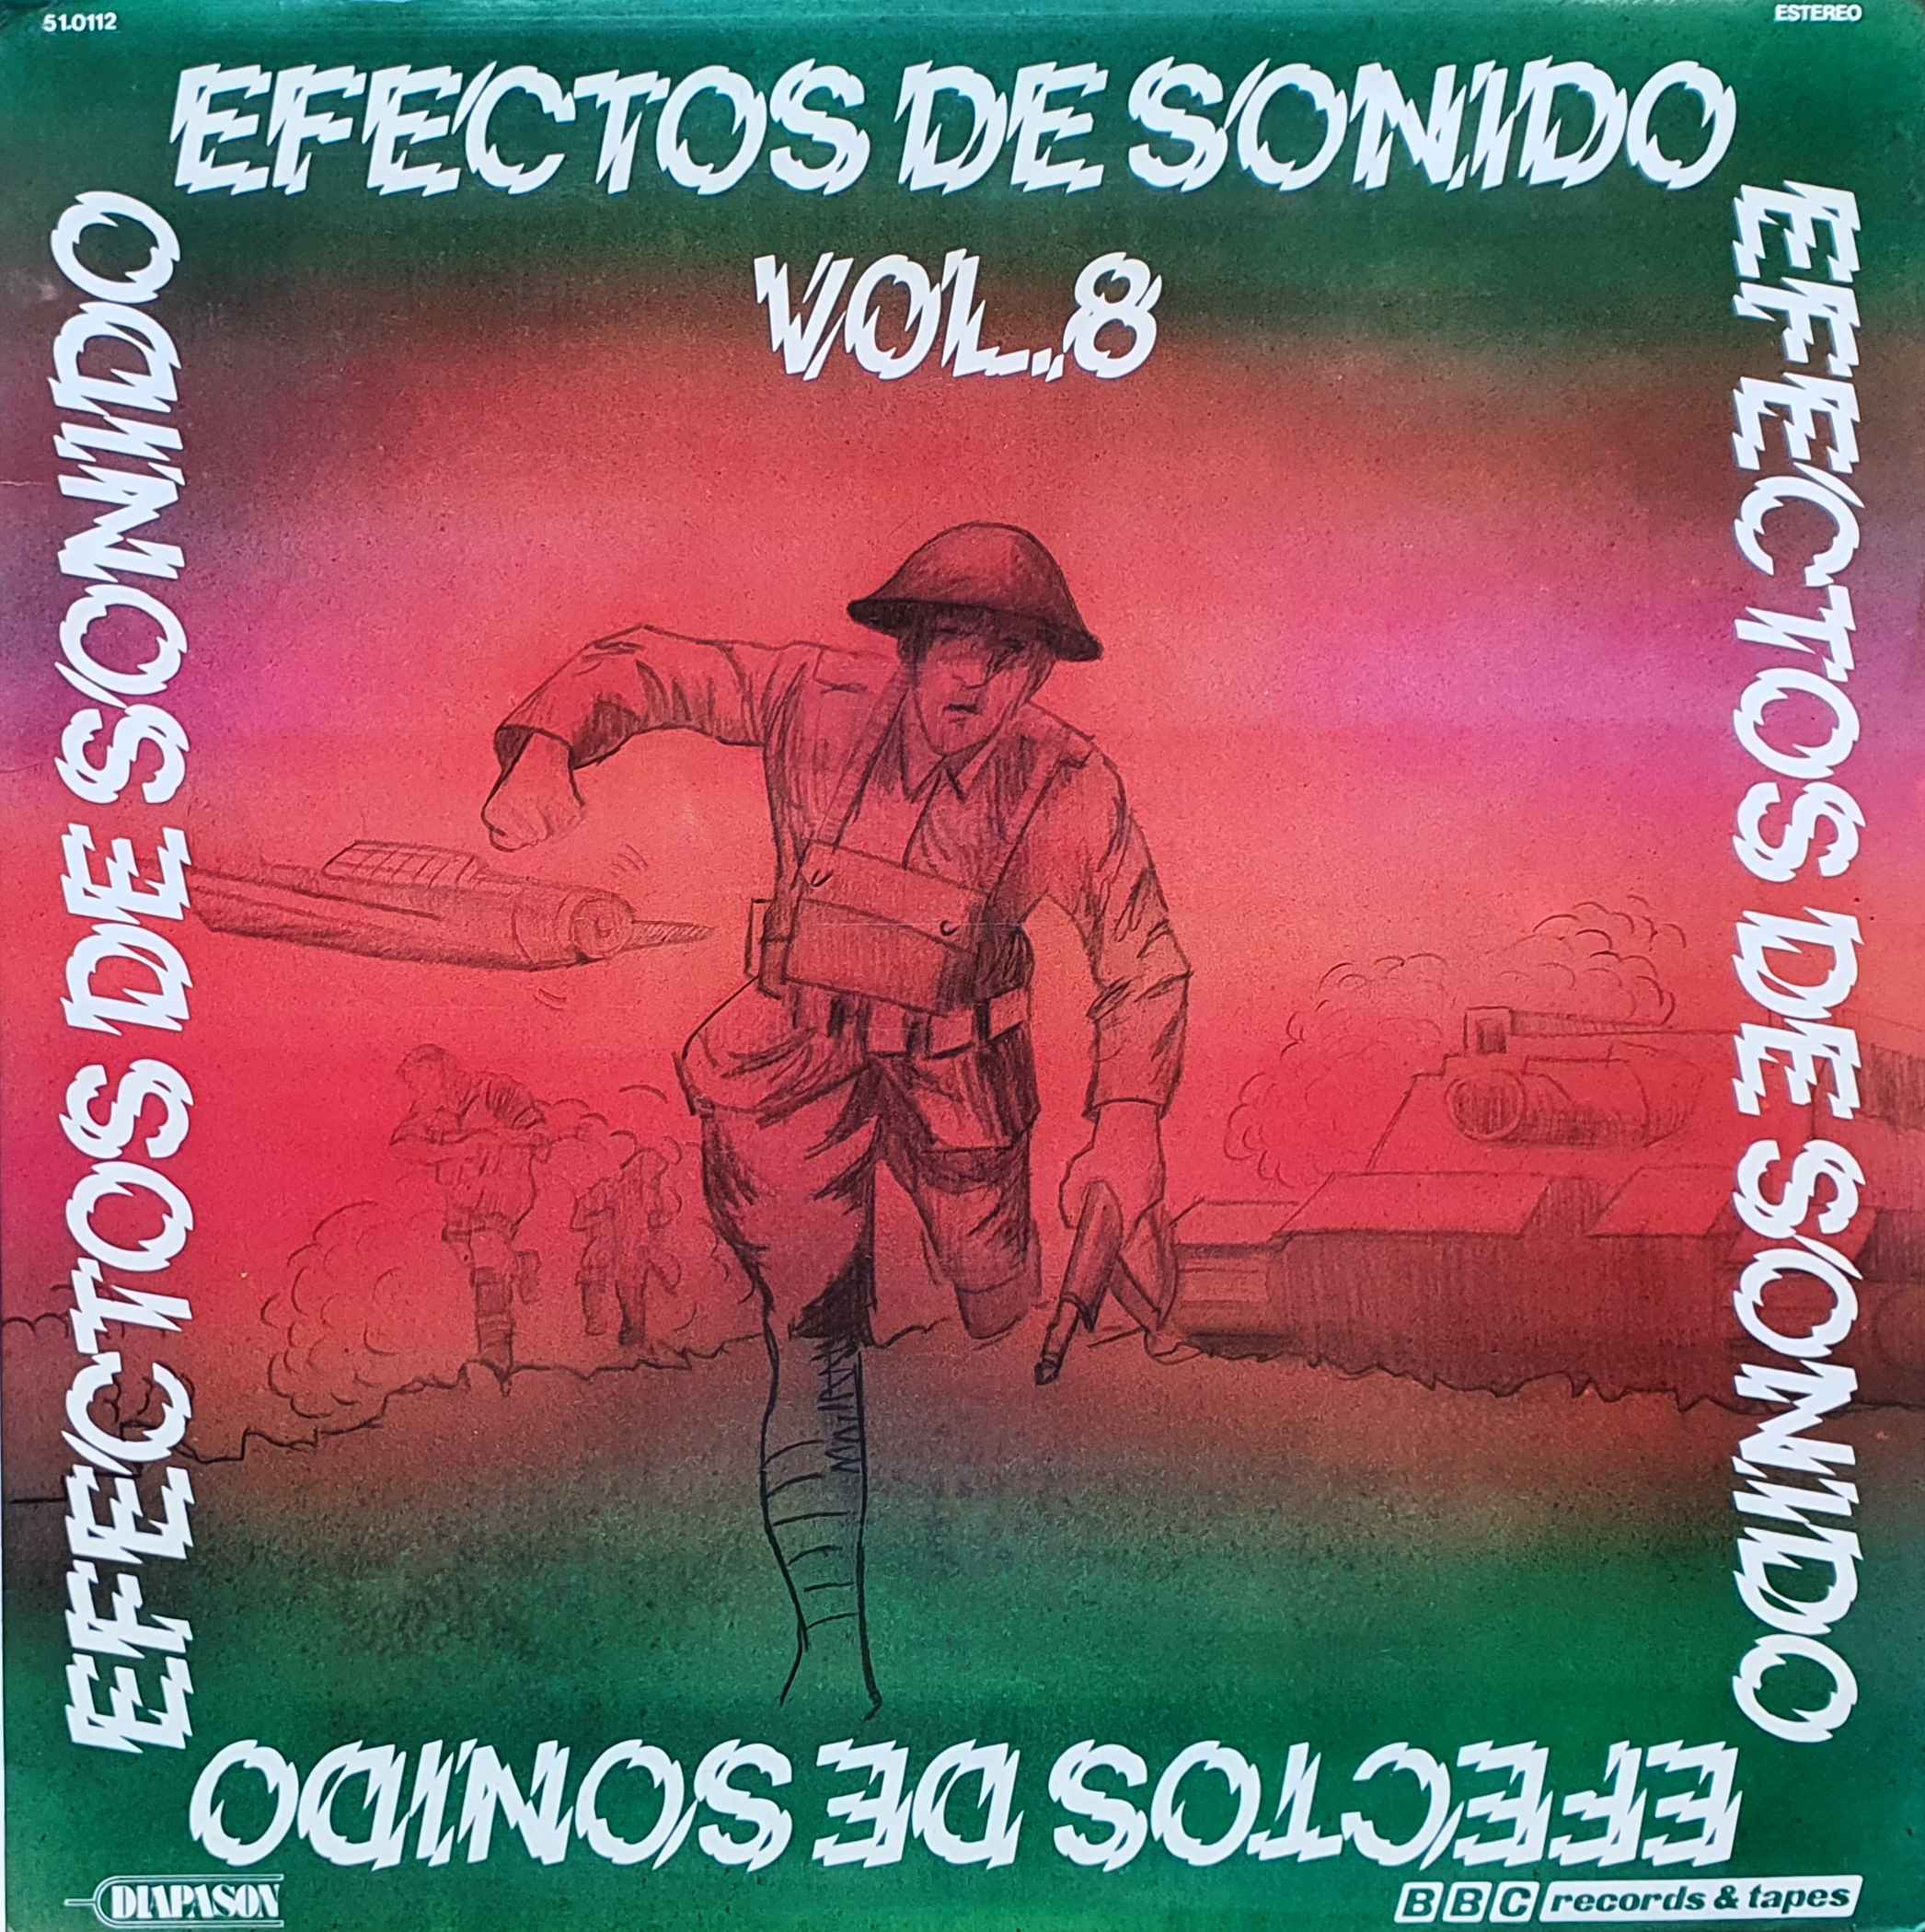 Picture of 51.0112 Efectos De Sonido No 8 (Spanish import) by artist Various from the BBC albums - Records and Tapes library